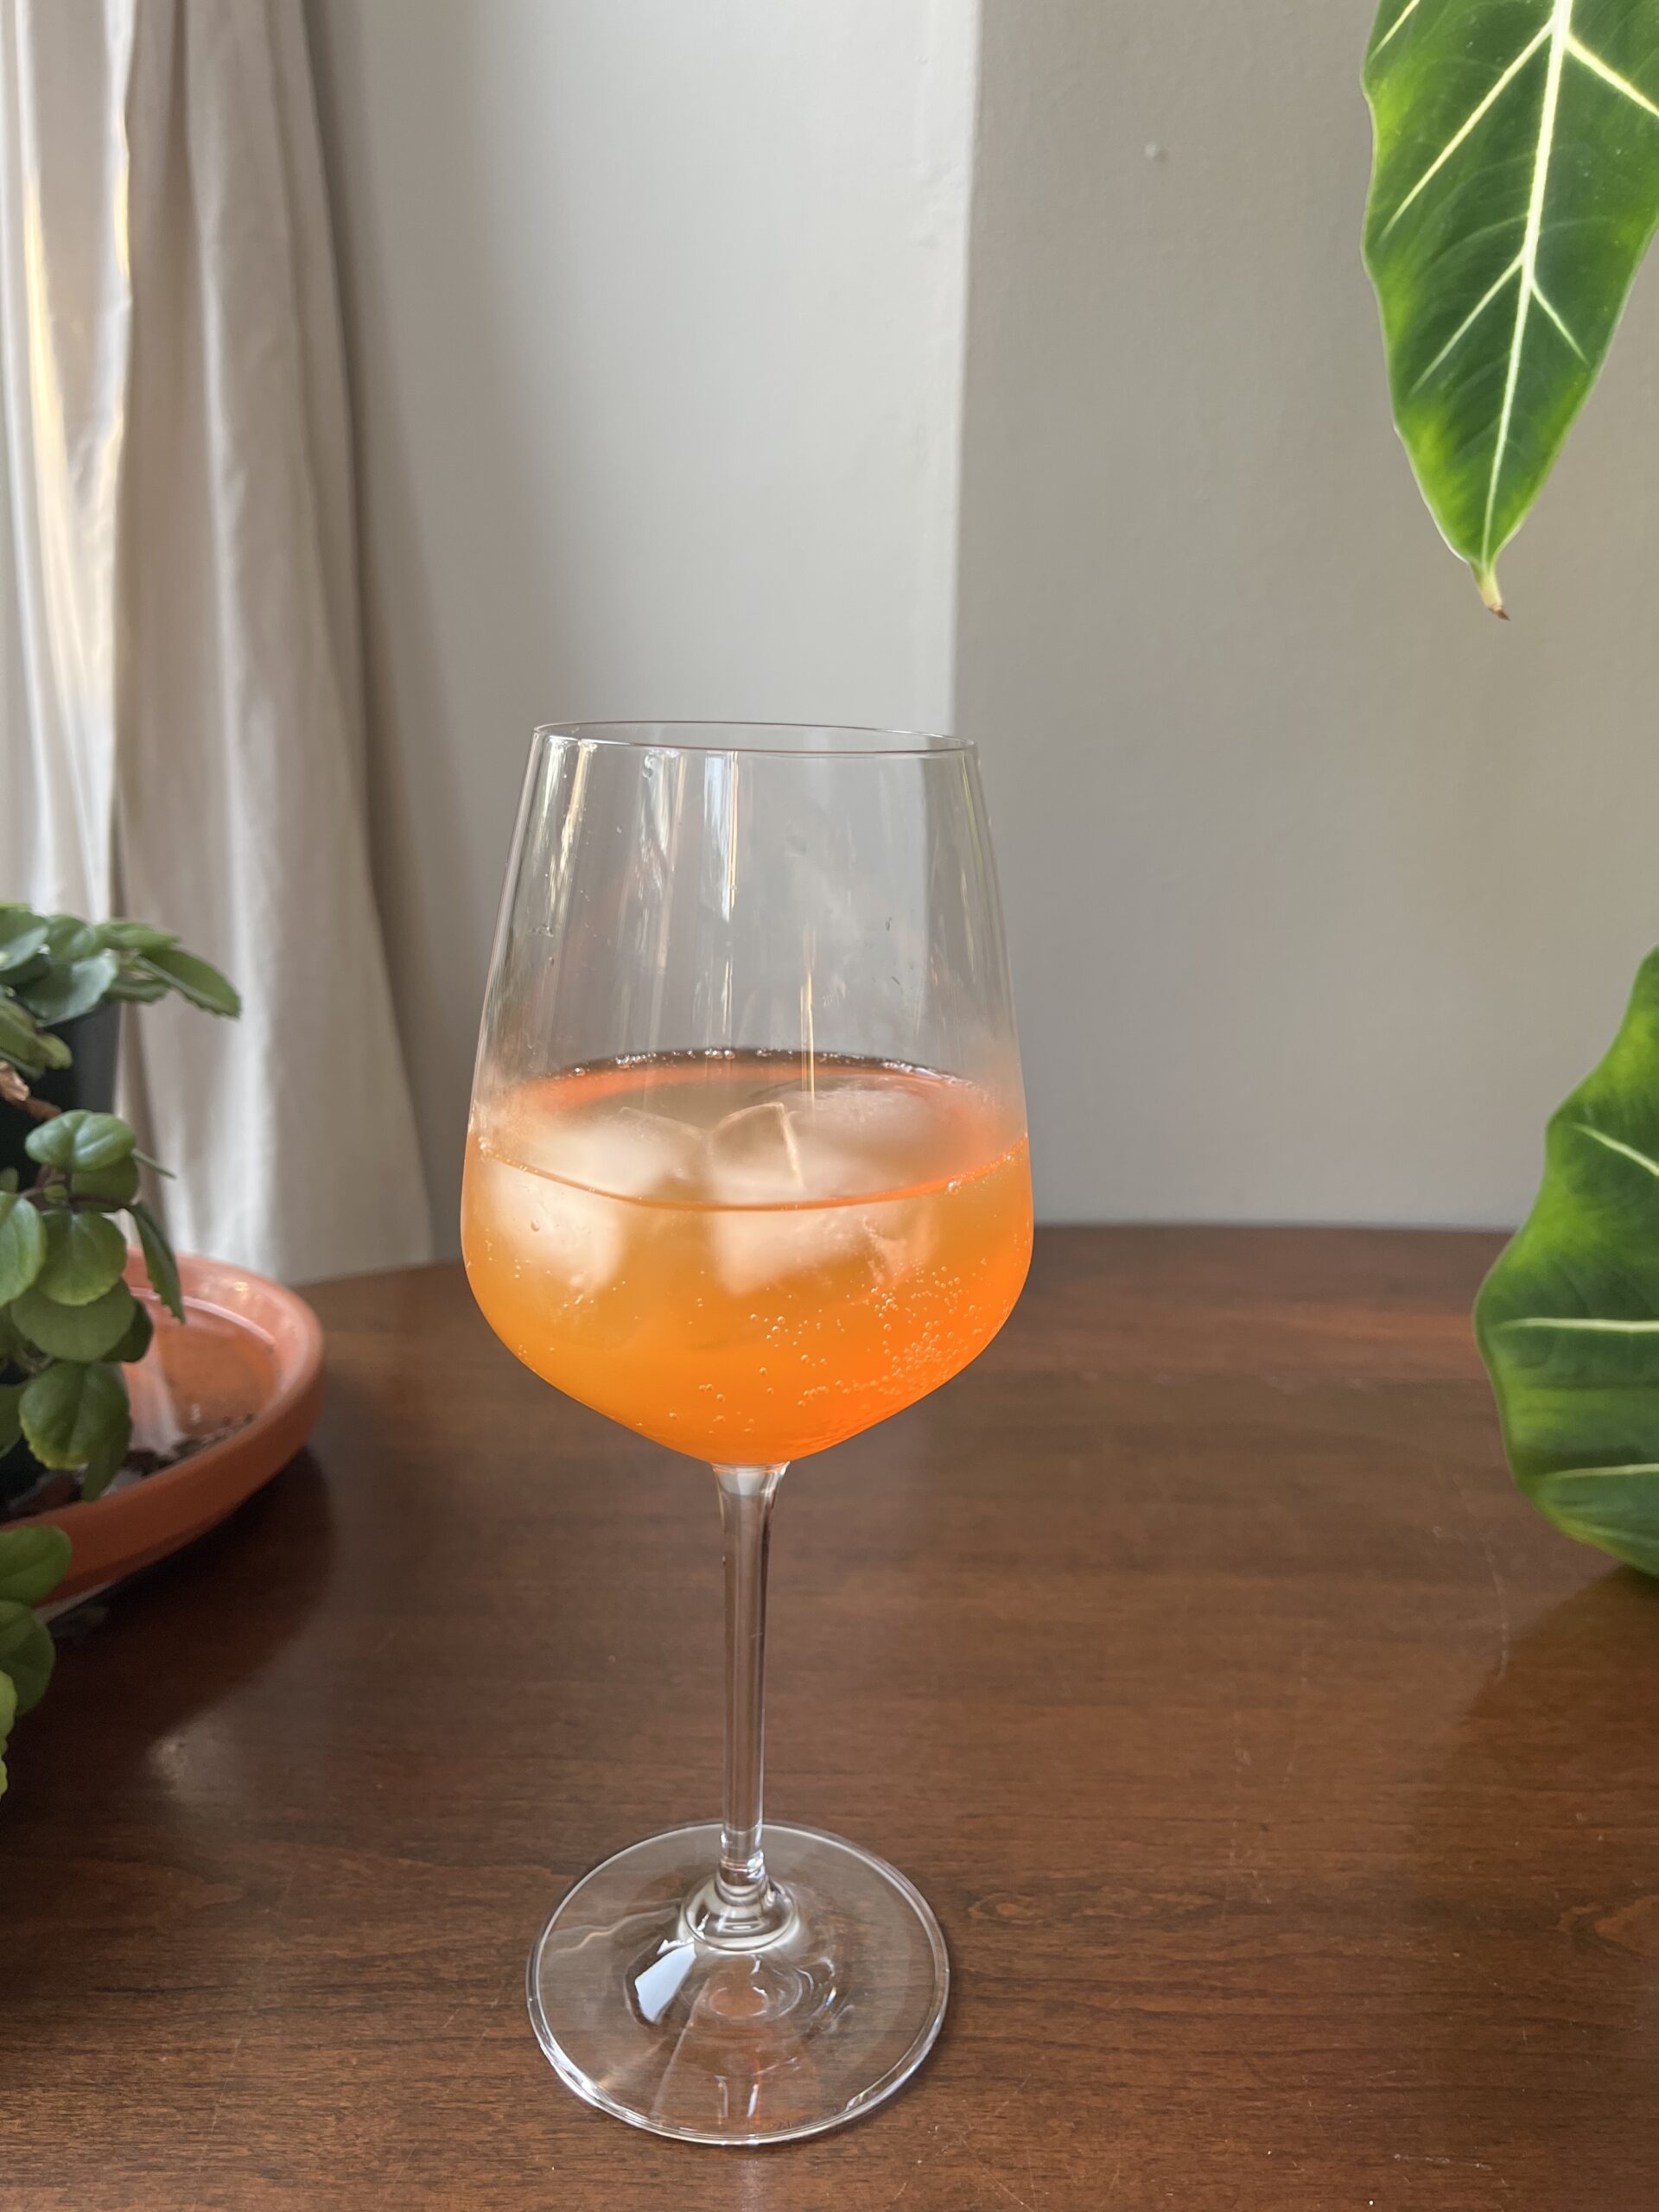 A wine glass filled with an orange beverage and ice cubes sits on a wooden table. The background includes green leafy plants and a white curtain.